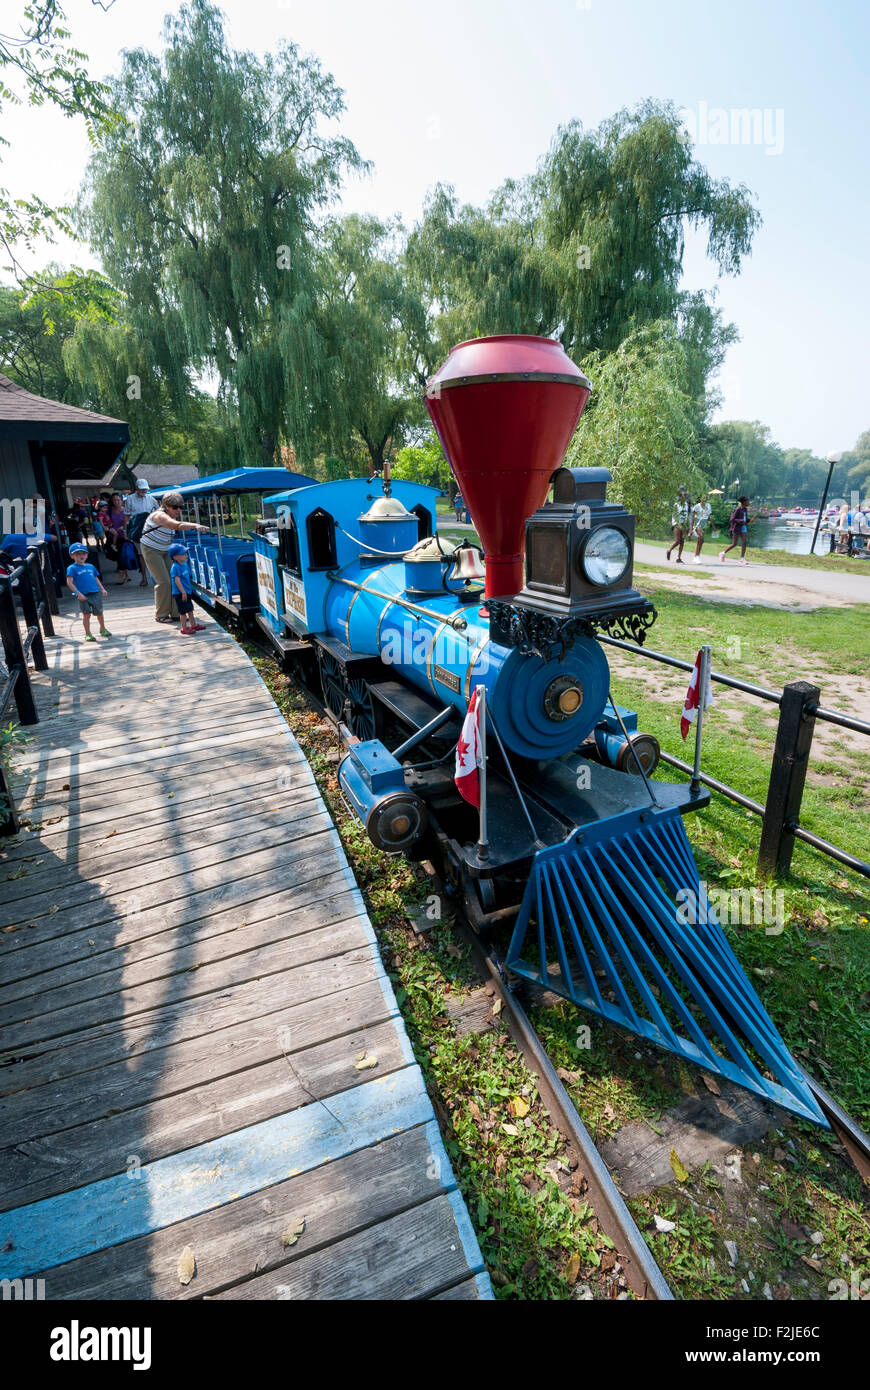 The well-known Centreville miniature train ride at Centreville amusement park on the Toronto Islands. Toronto Ontario Canada Stock Photo